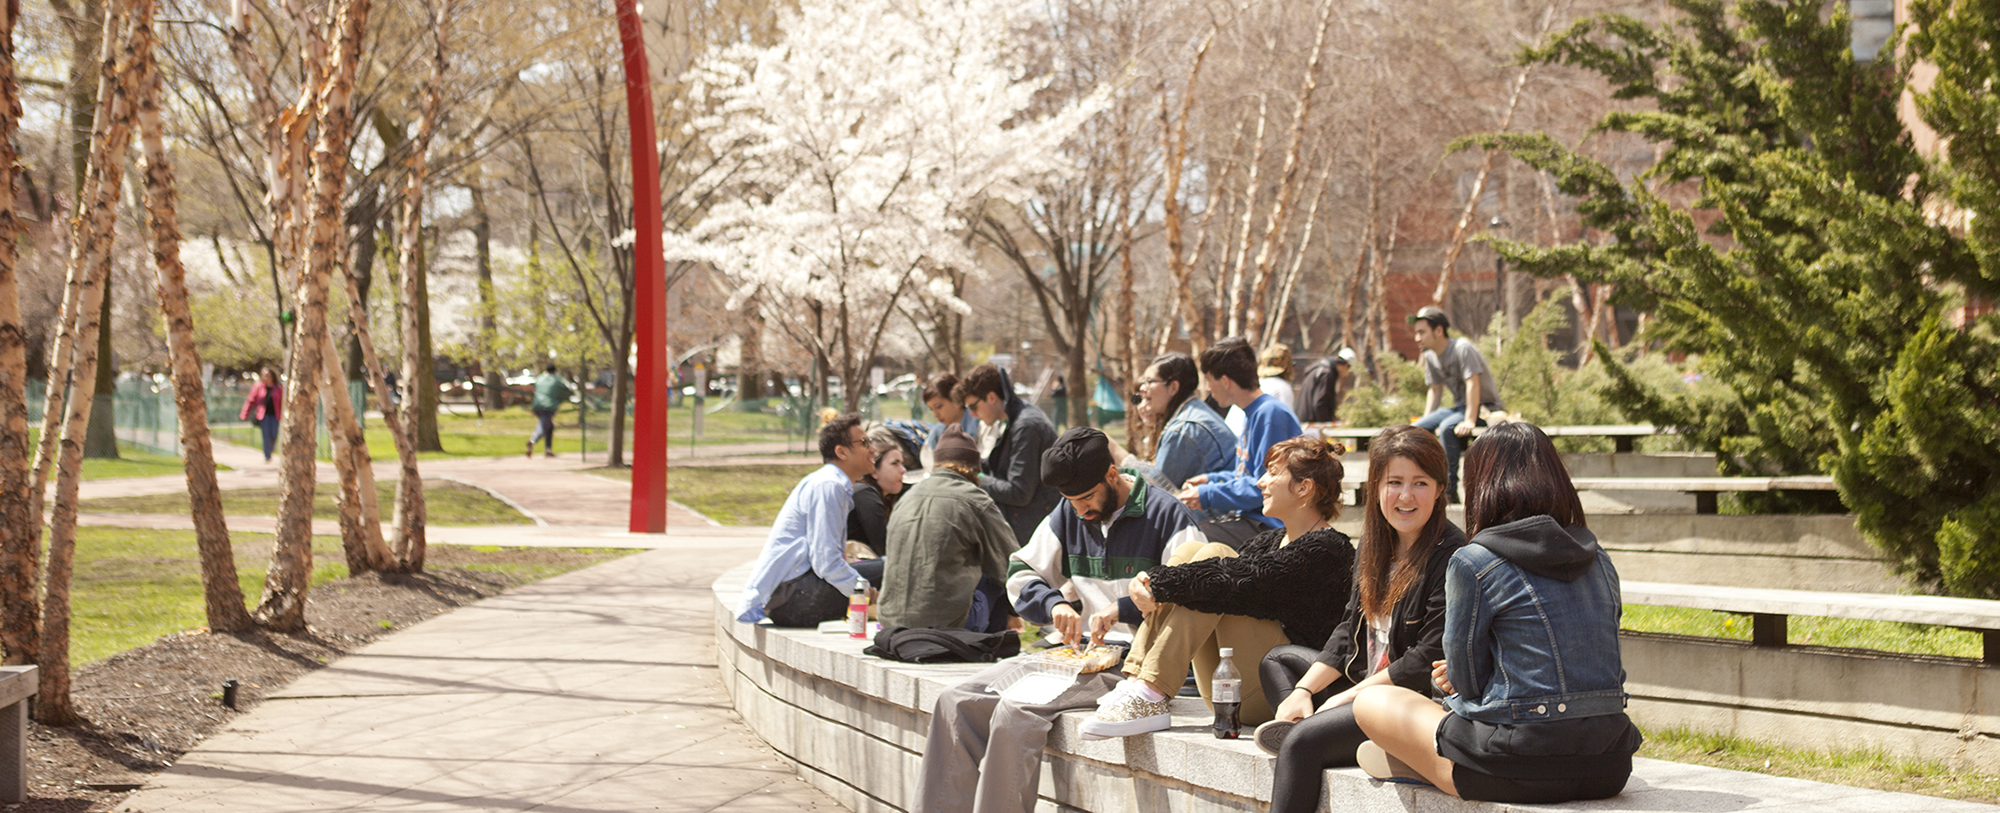 A group of students sit on a stone railing by a path in a park. There are cherry blossoms in the background.